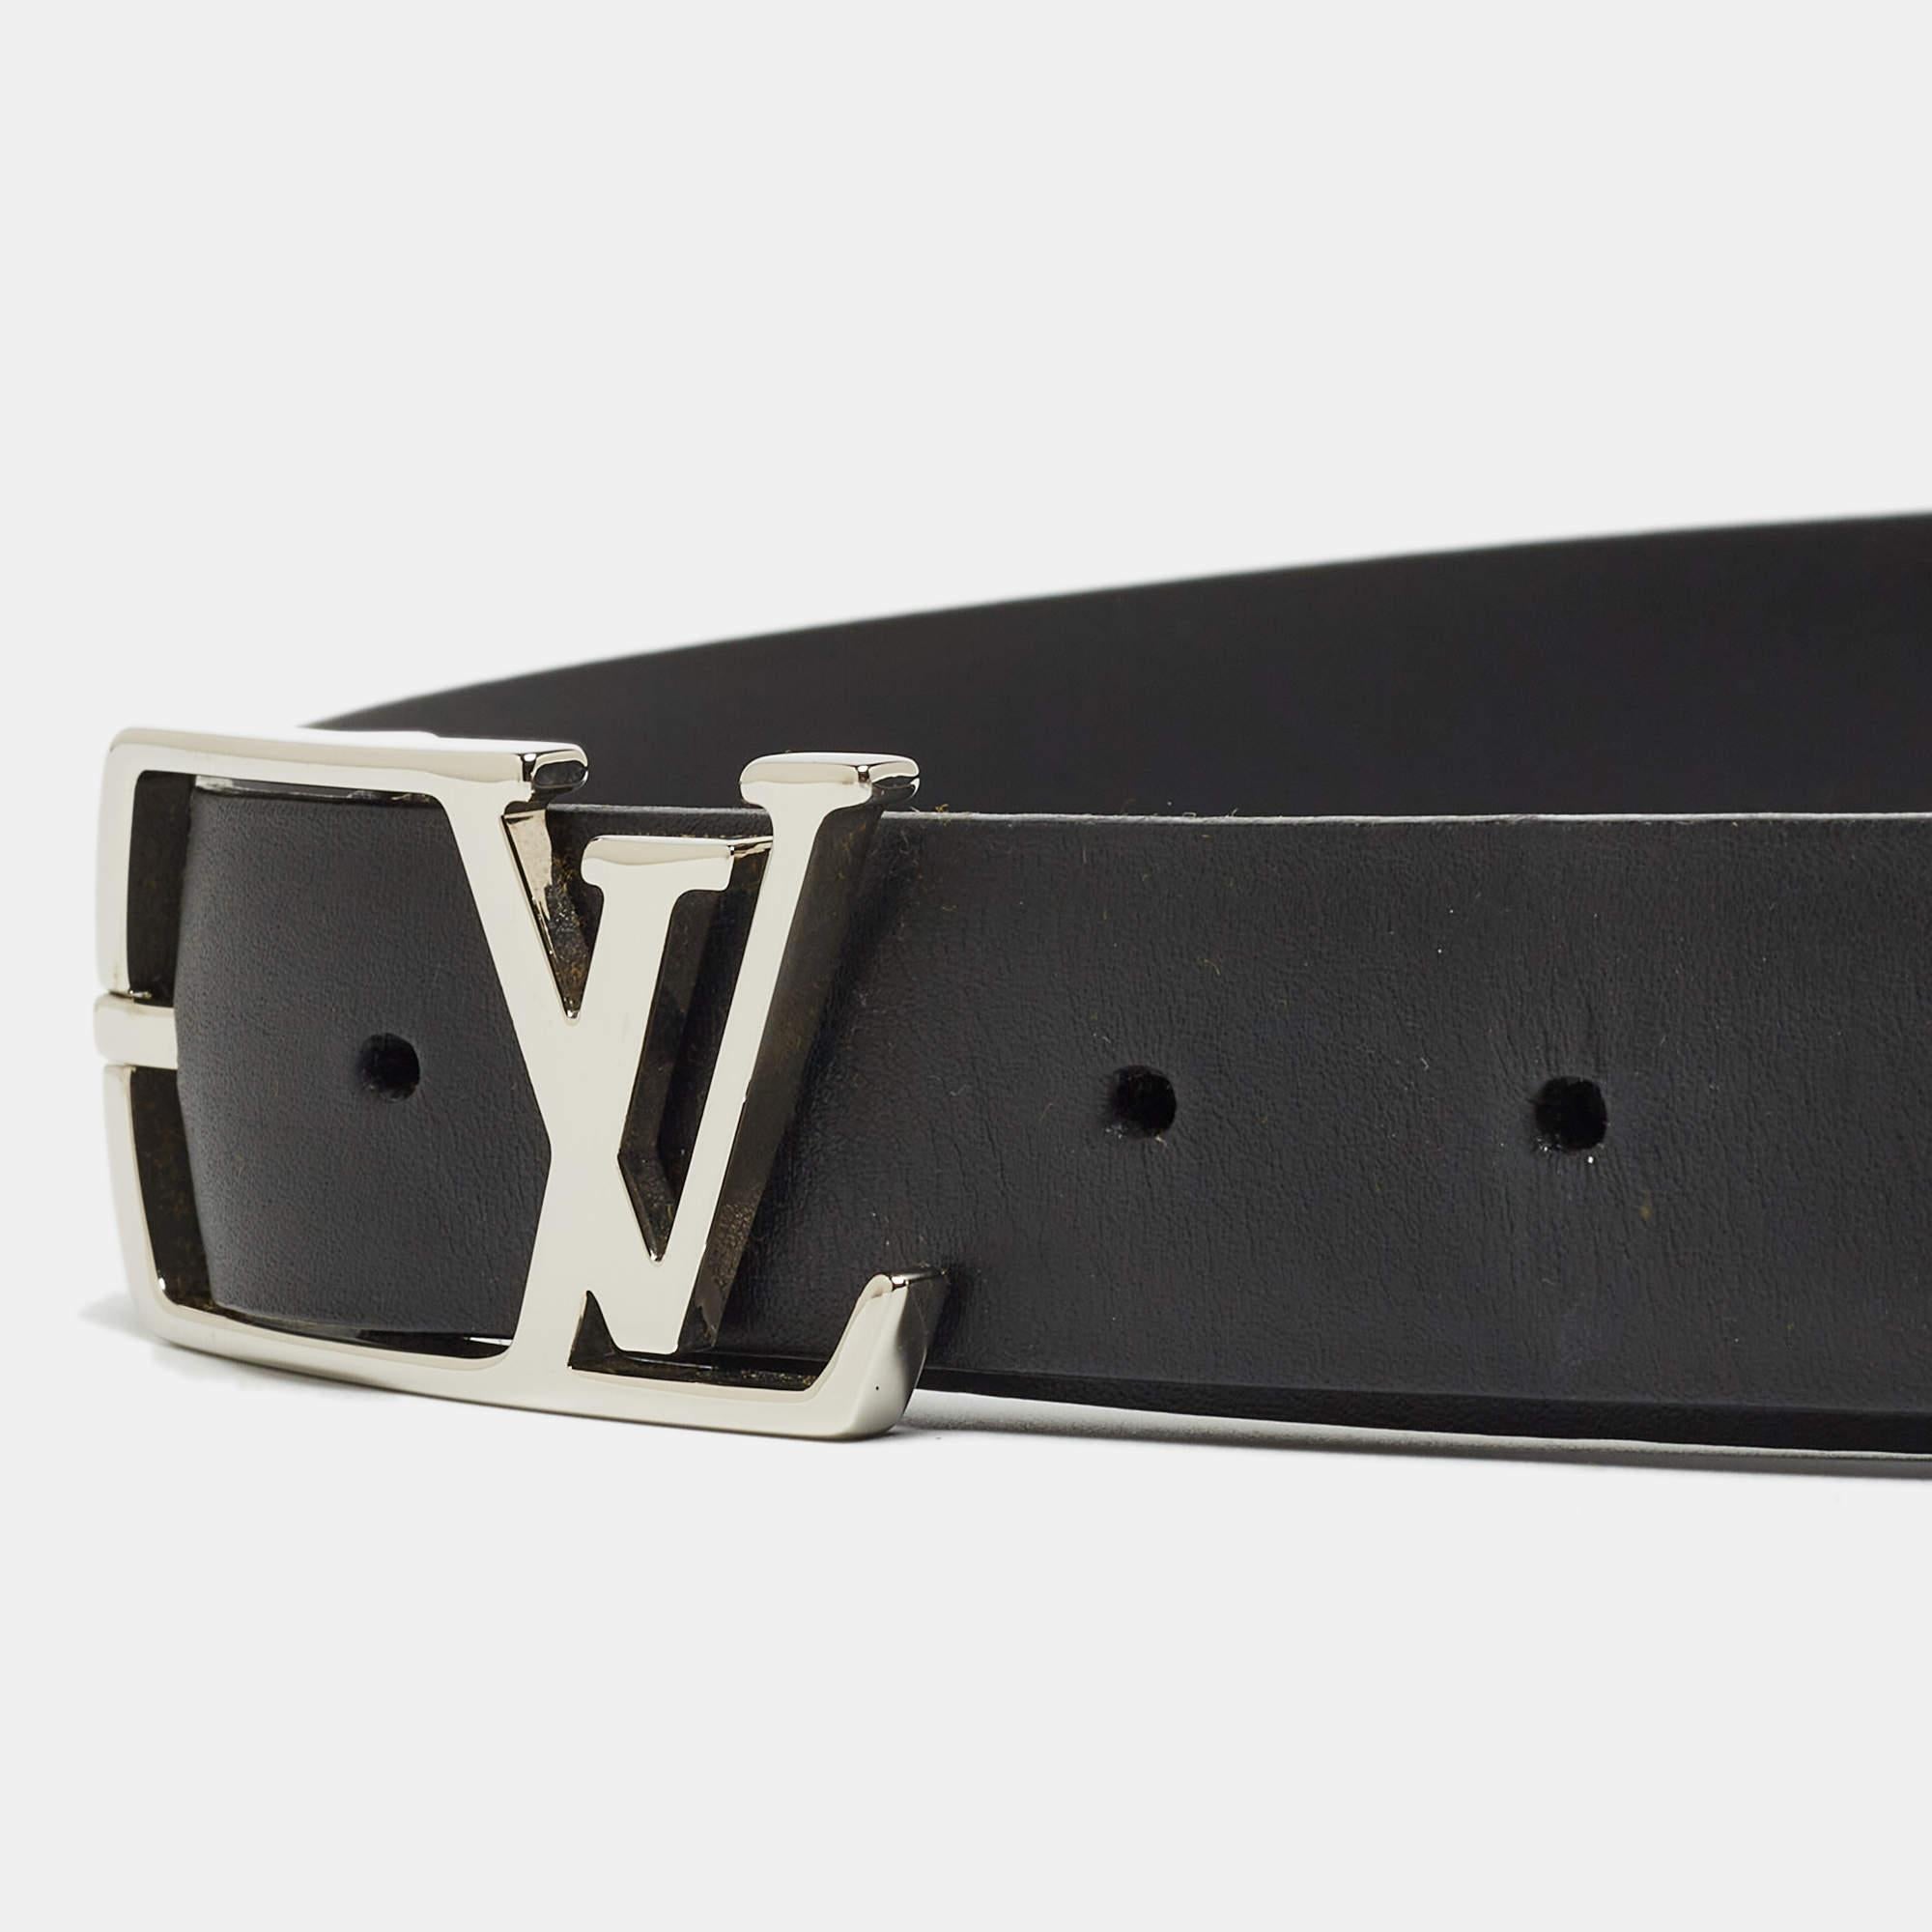 Pick this subtle piece of accessory to upgrade your formal ensembles. The Neogram belt from Louis Vuitton is crafted with black leather. It features an LV logo and a pin buckle closure in silver-tone hardware.

